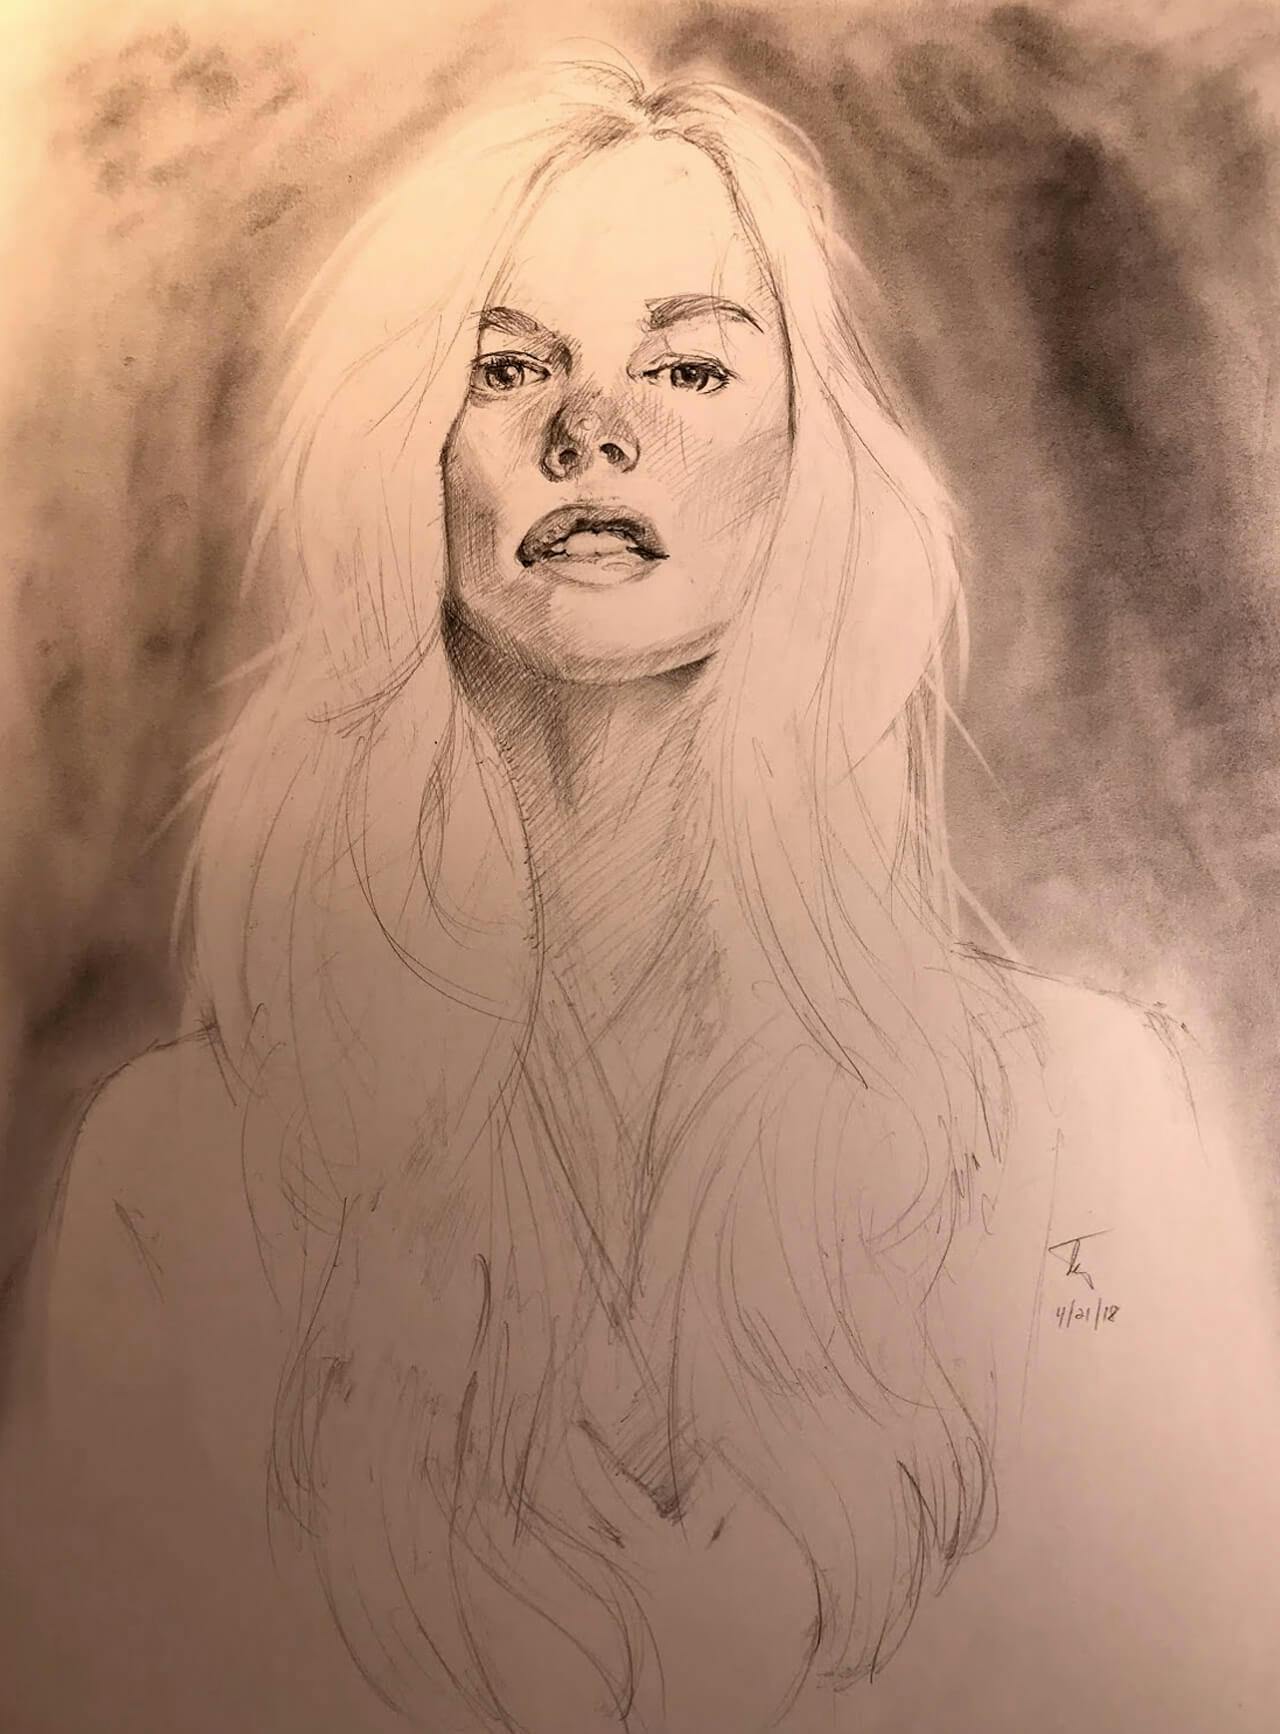 Graphite drawing, woman with long blonde hair looking straight ahead